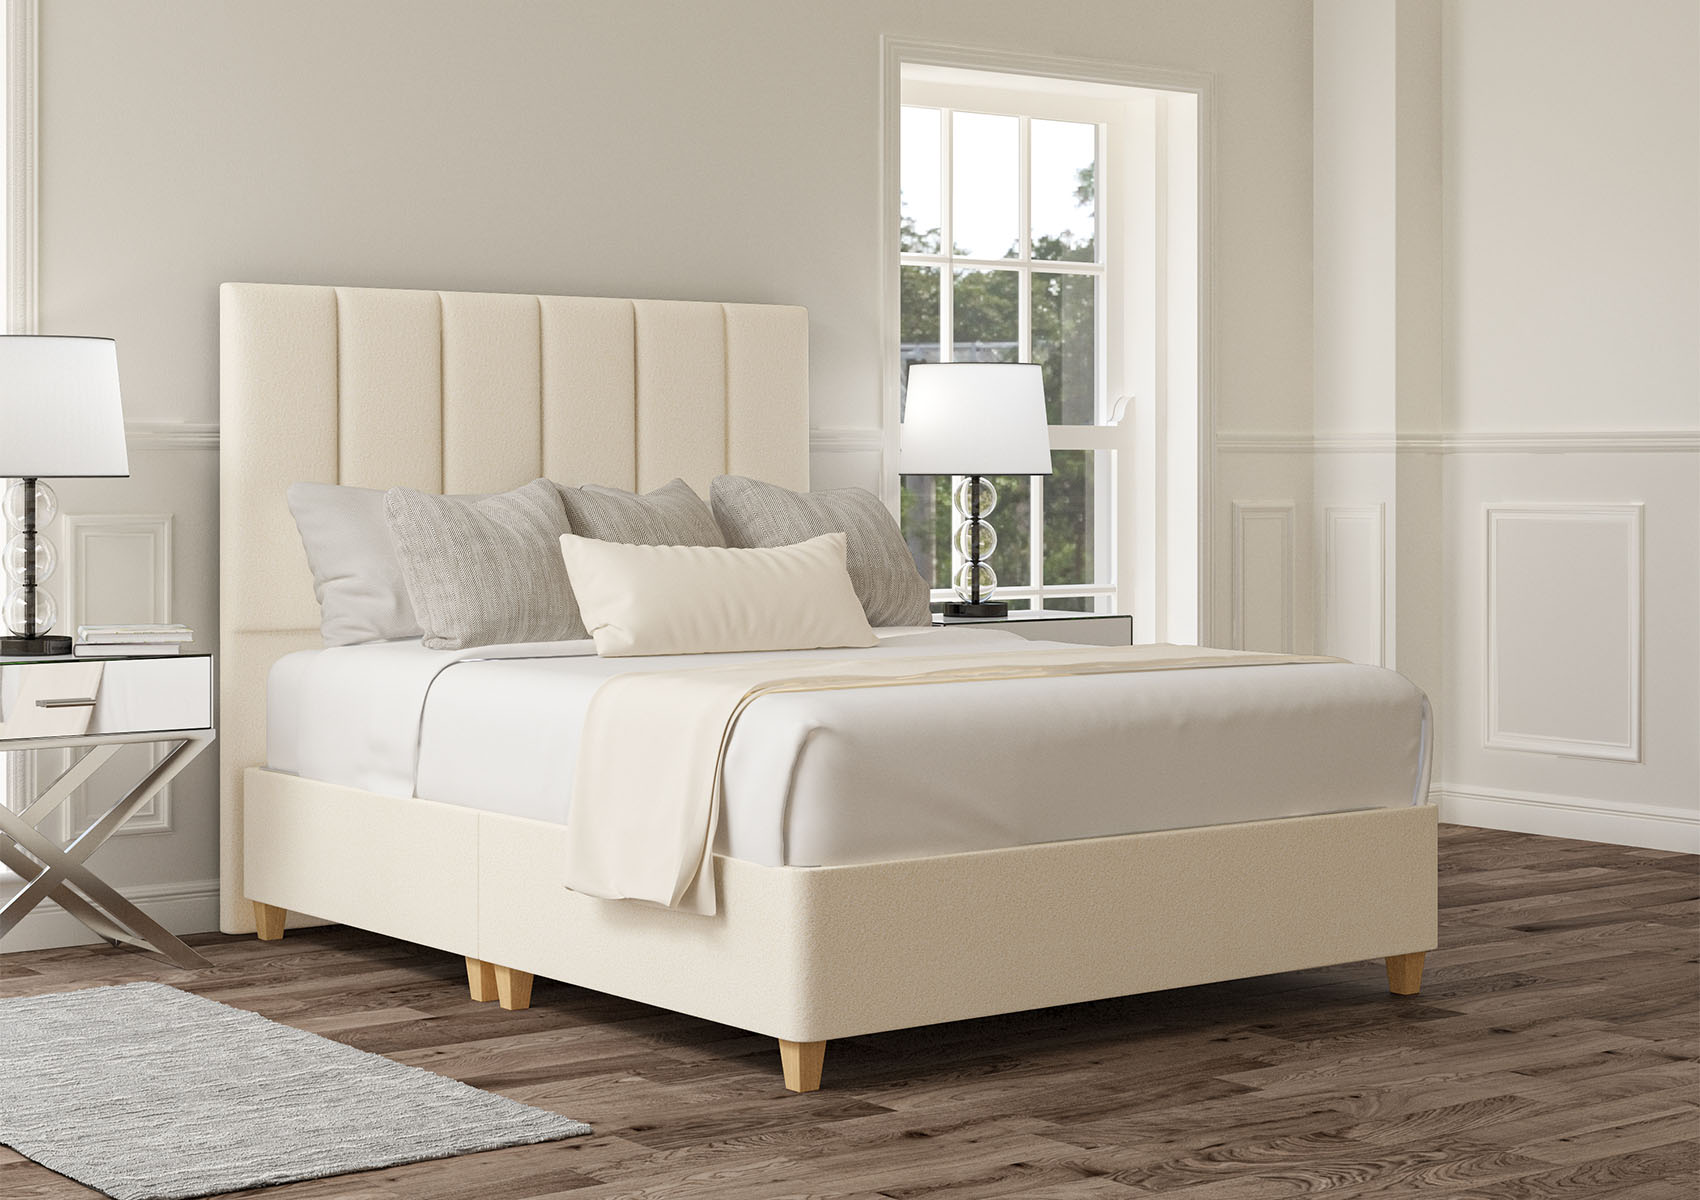 View Empire Heritage Royal Upholstered Single Divan Bed Time4Sleep information